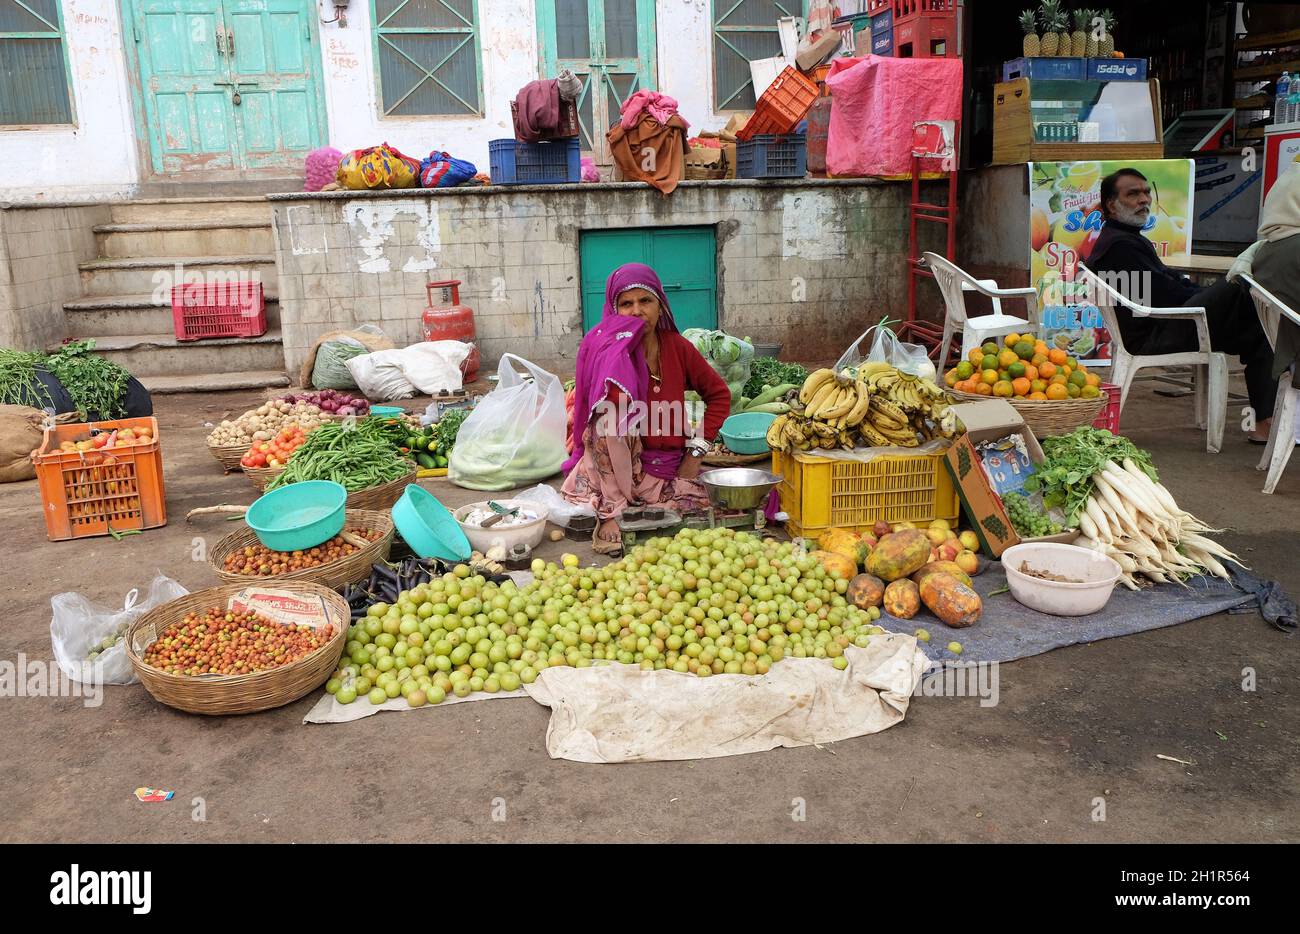 Woman Selling Fruit And Veg At A Street Market In Pushkar Rajasthan India Stock Photo Alamy